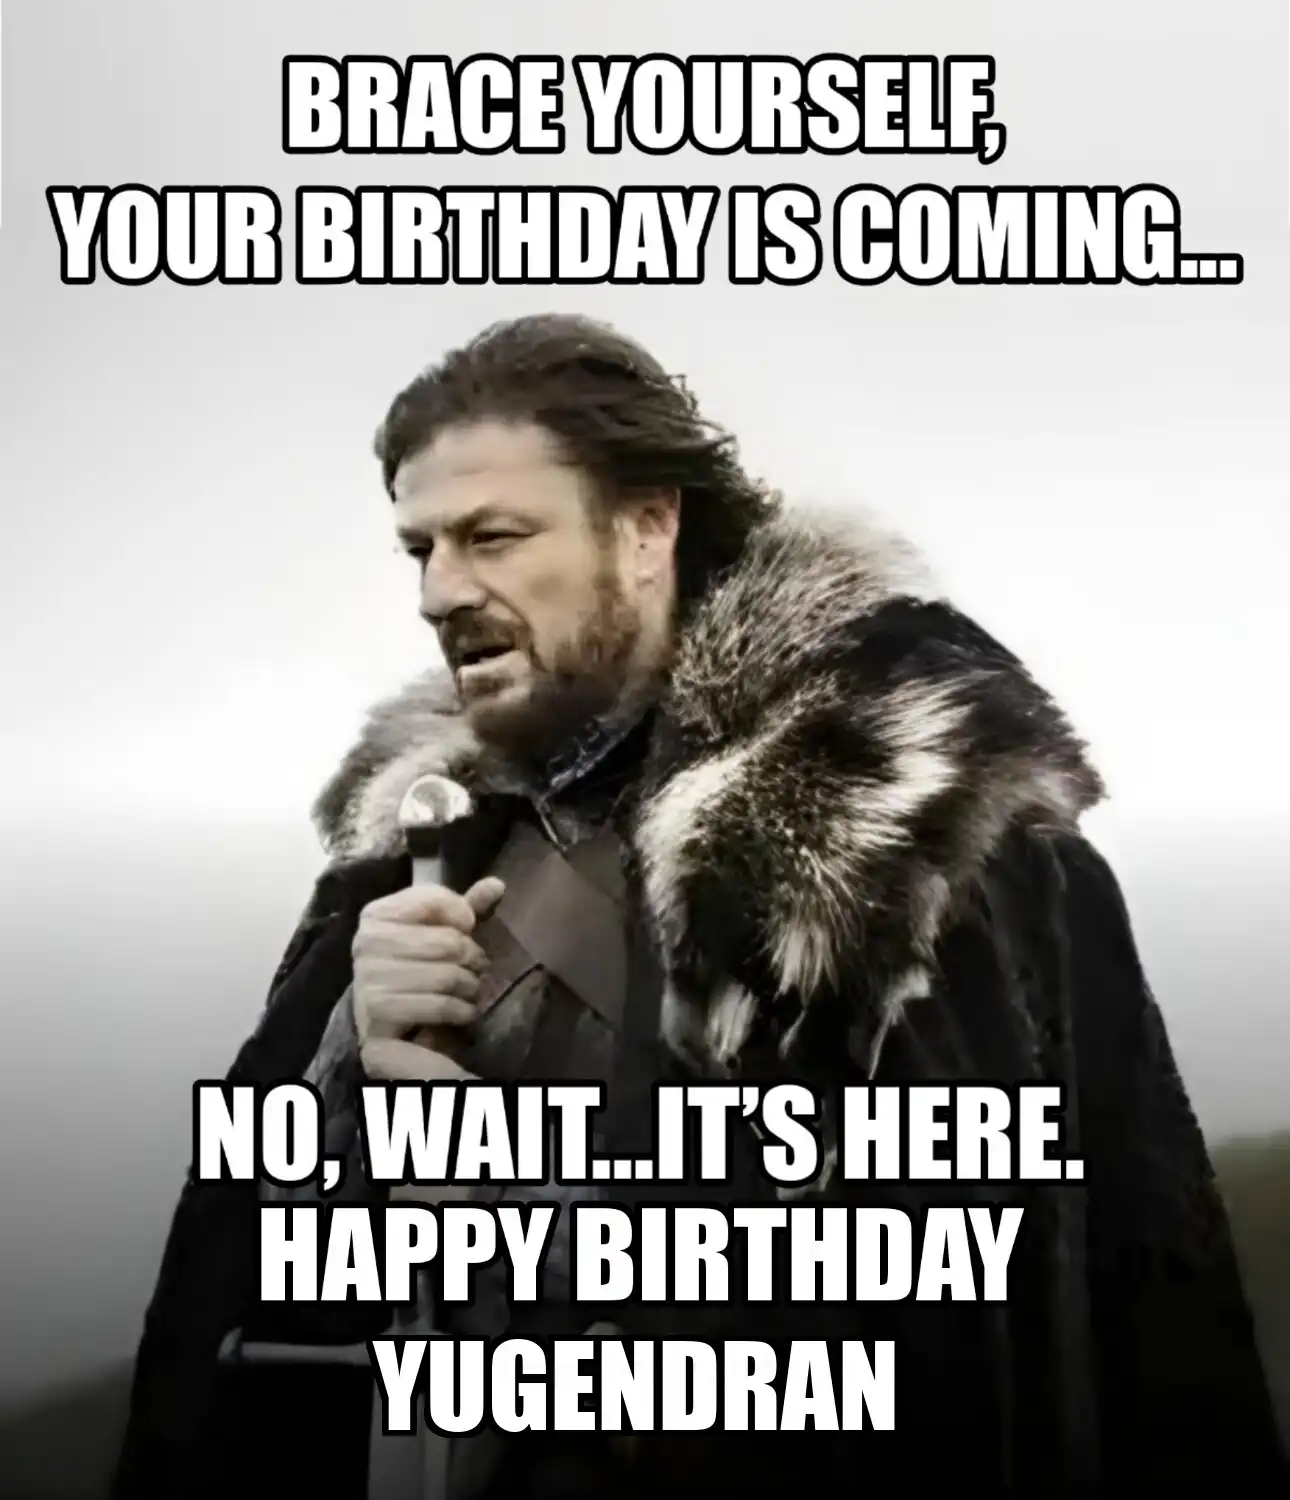 Happy Birthday Yugendran Brace Yourself Your Birthday Is Coming Meme